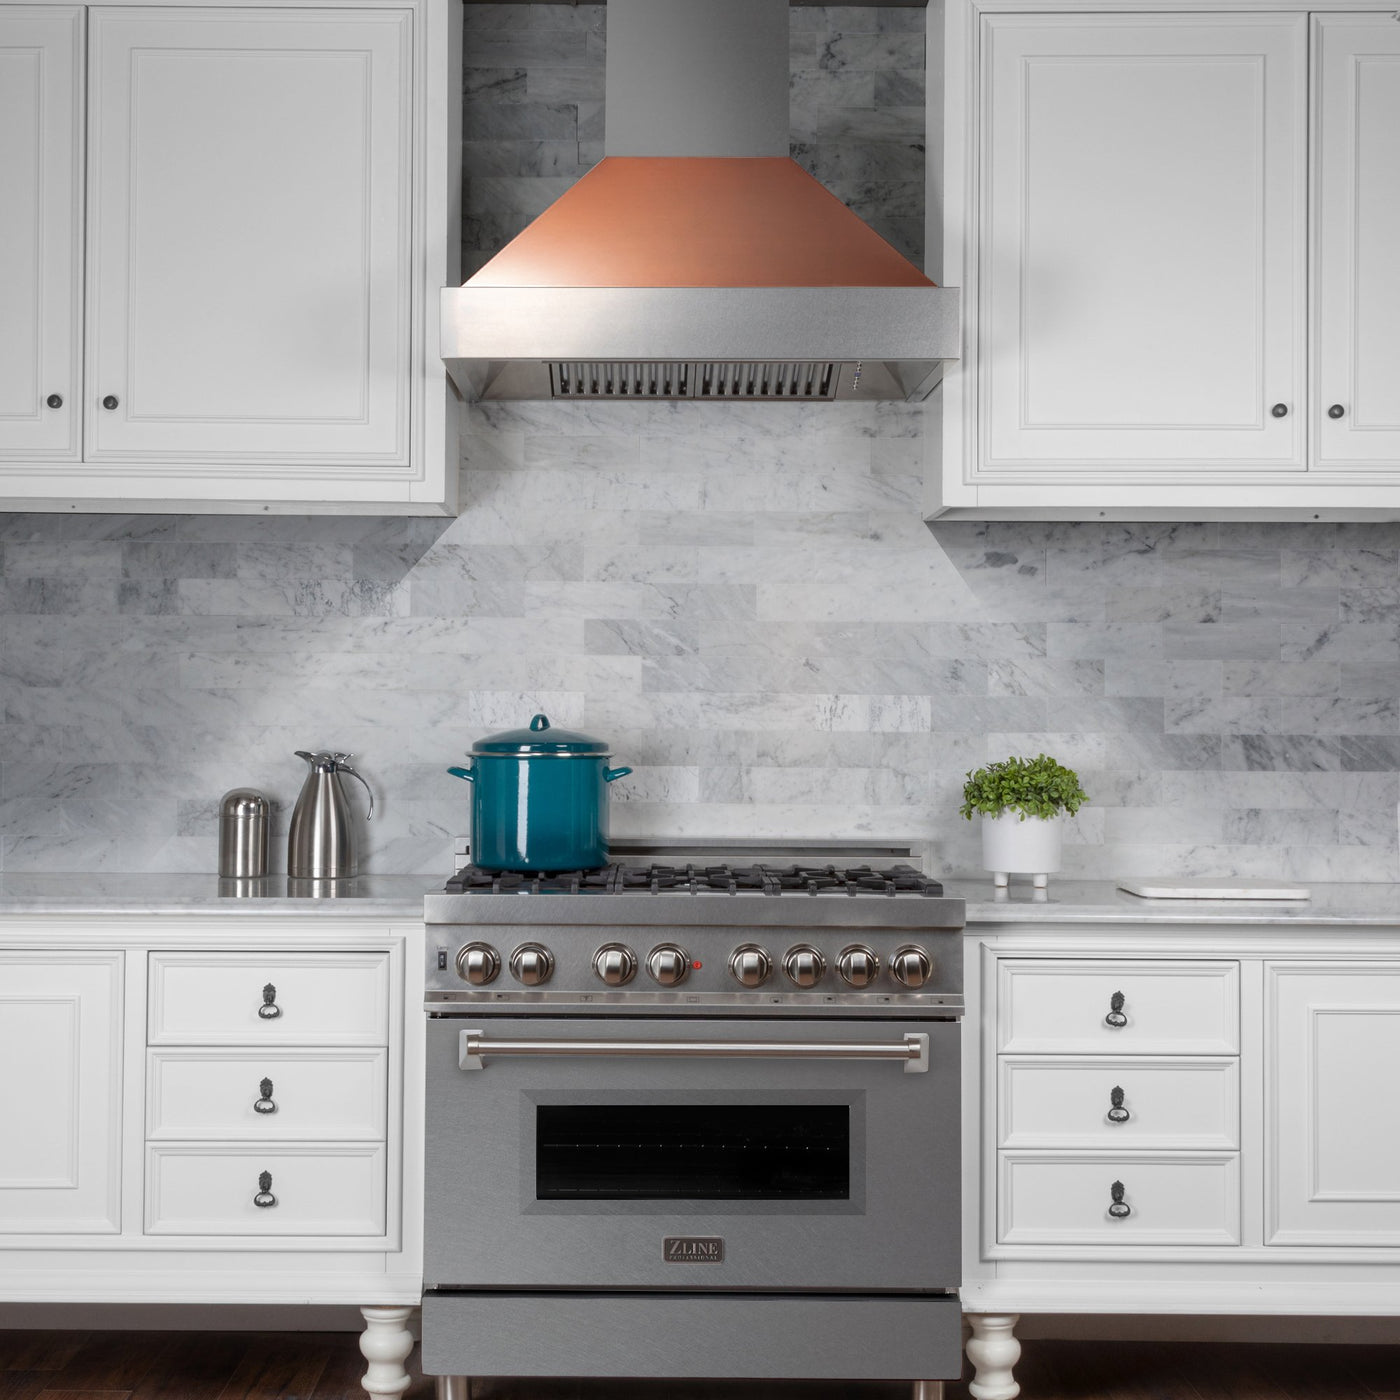 ZLINE Ducted DuraSnow® Stainless Steel Range Hood with Copper Shell (8654C)